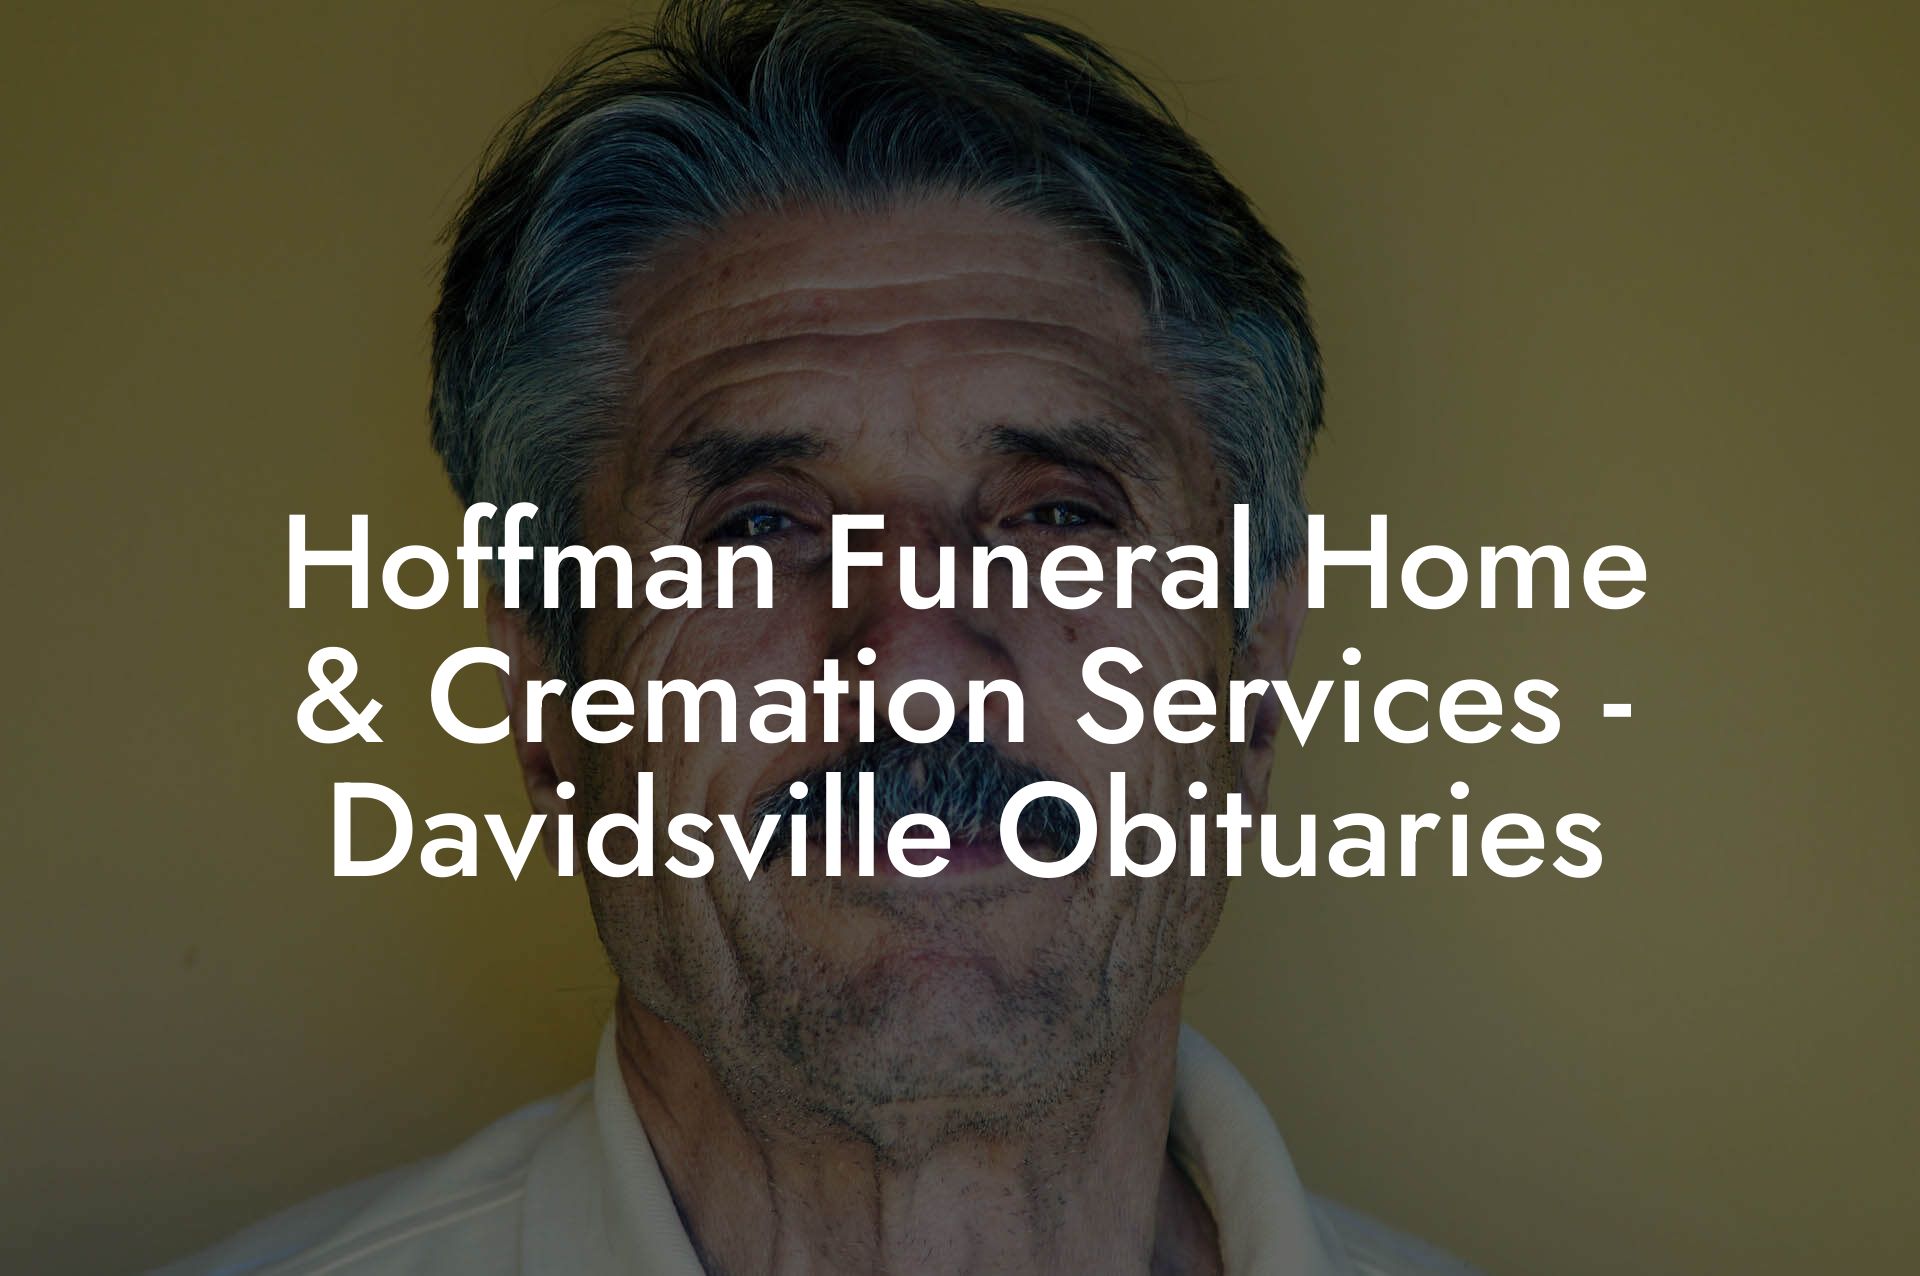 Hoffman Funeral Home & Cremation Services - Davidsville Obituaries